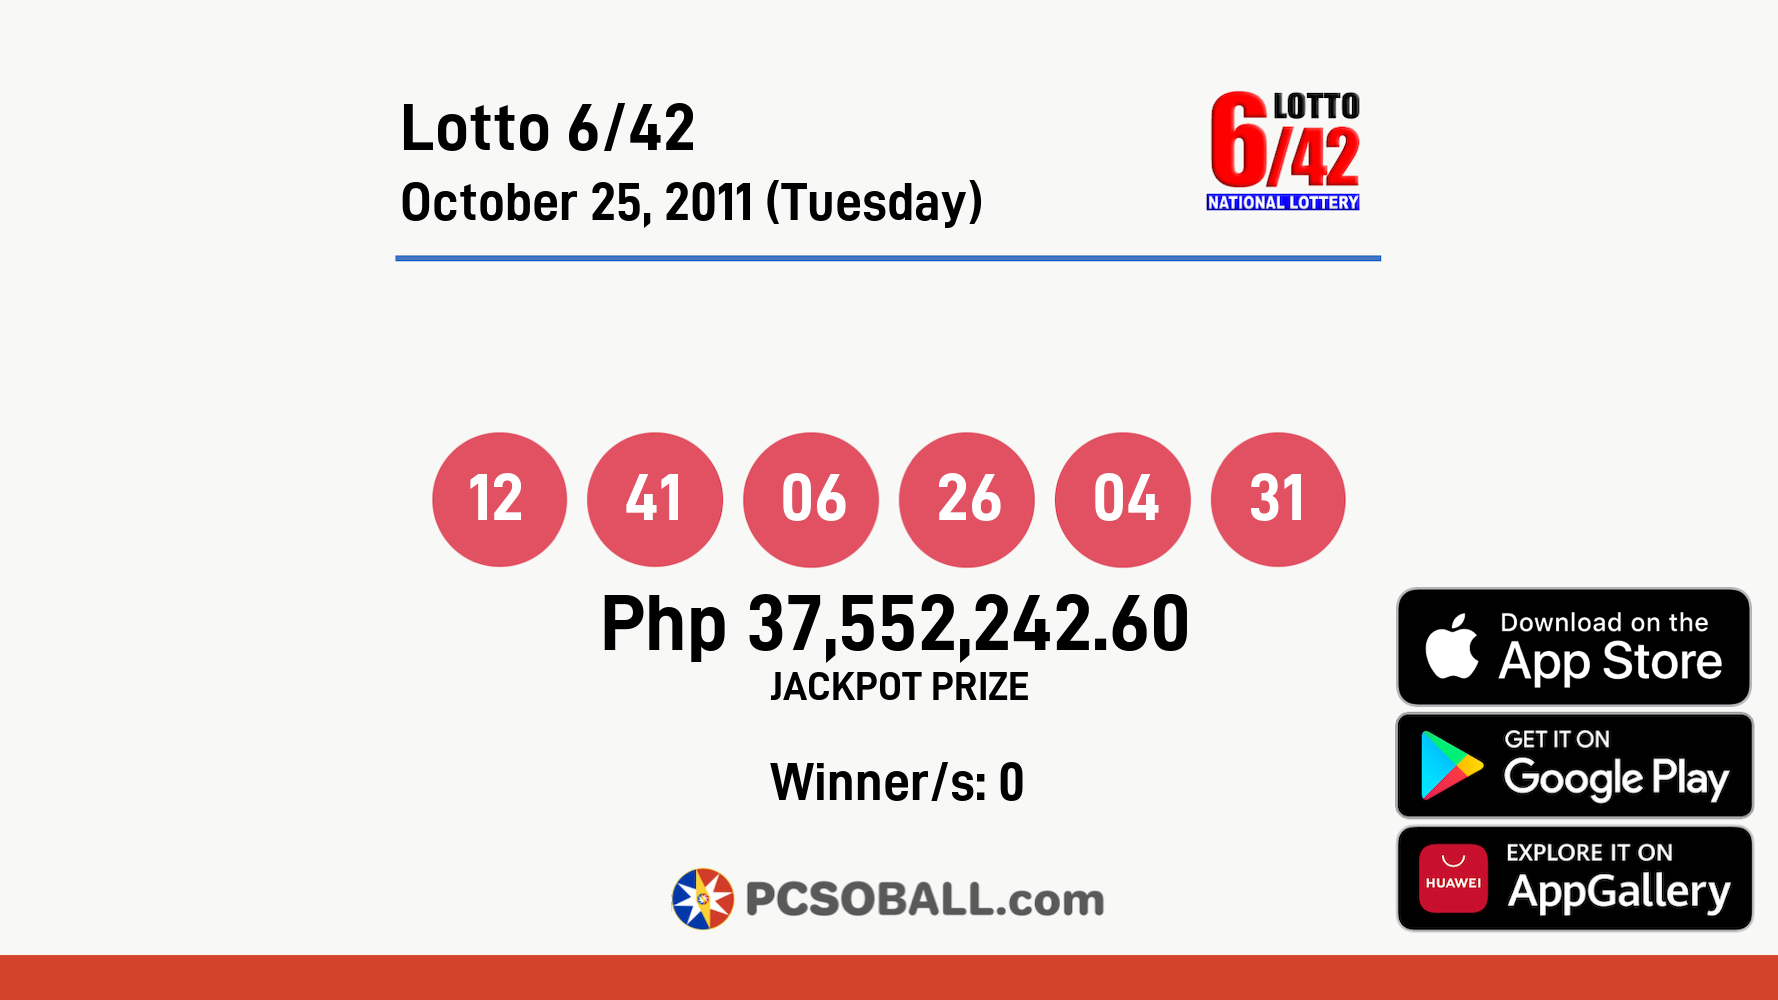 Lotto 6/42 October 25, 2011 (Tuesday) Result